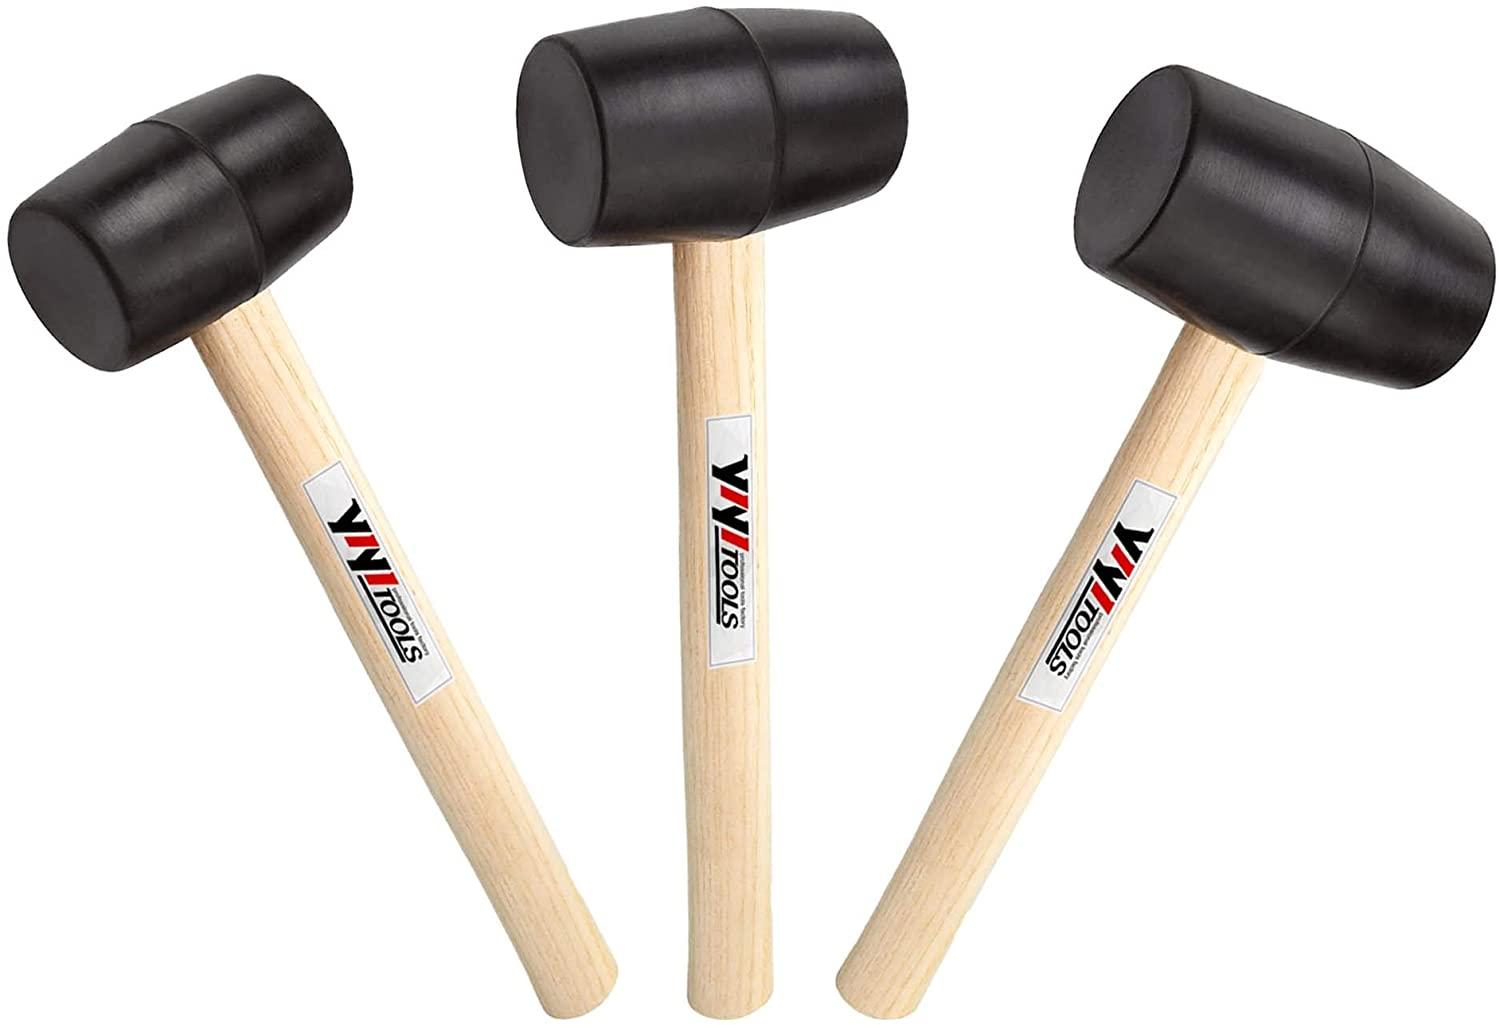 3 Rubber Mallet Set with Wood Handles for $8.15